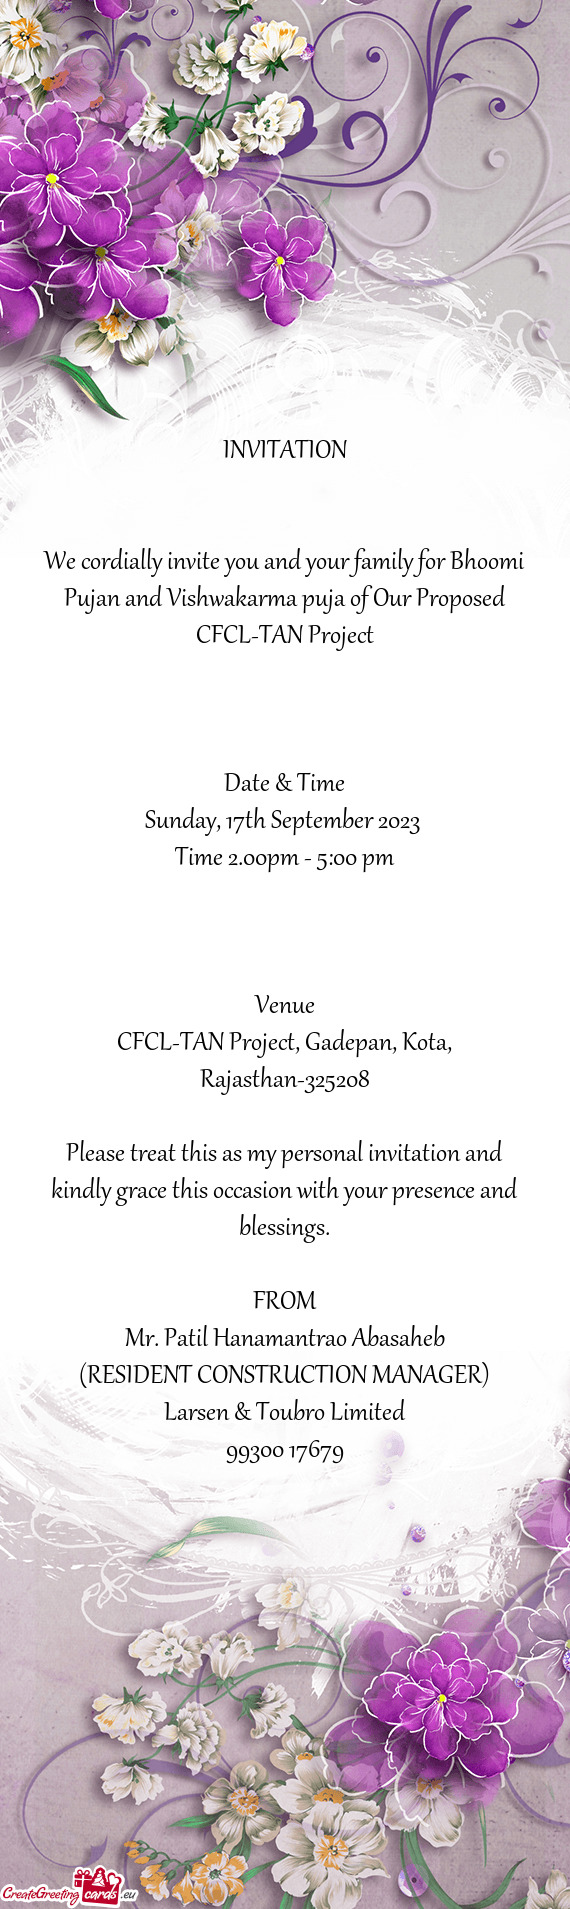 We cordially invite you and your family for Bhoomi Pujan and Vishwakarma puja of Our Proposed CFCL-T